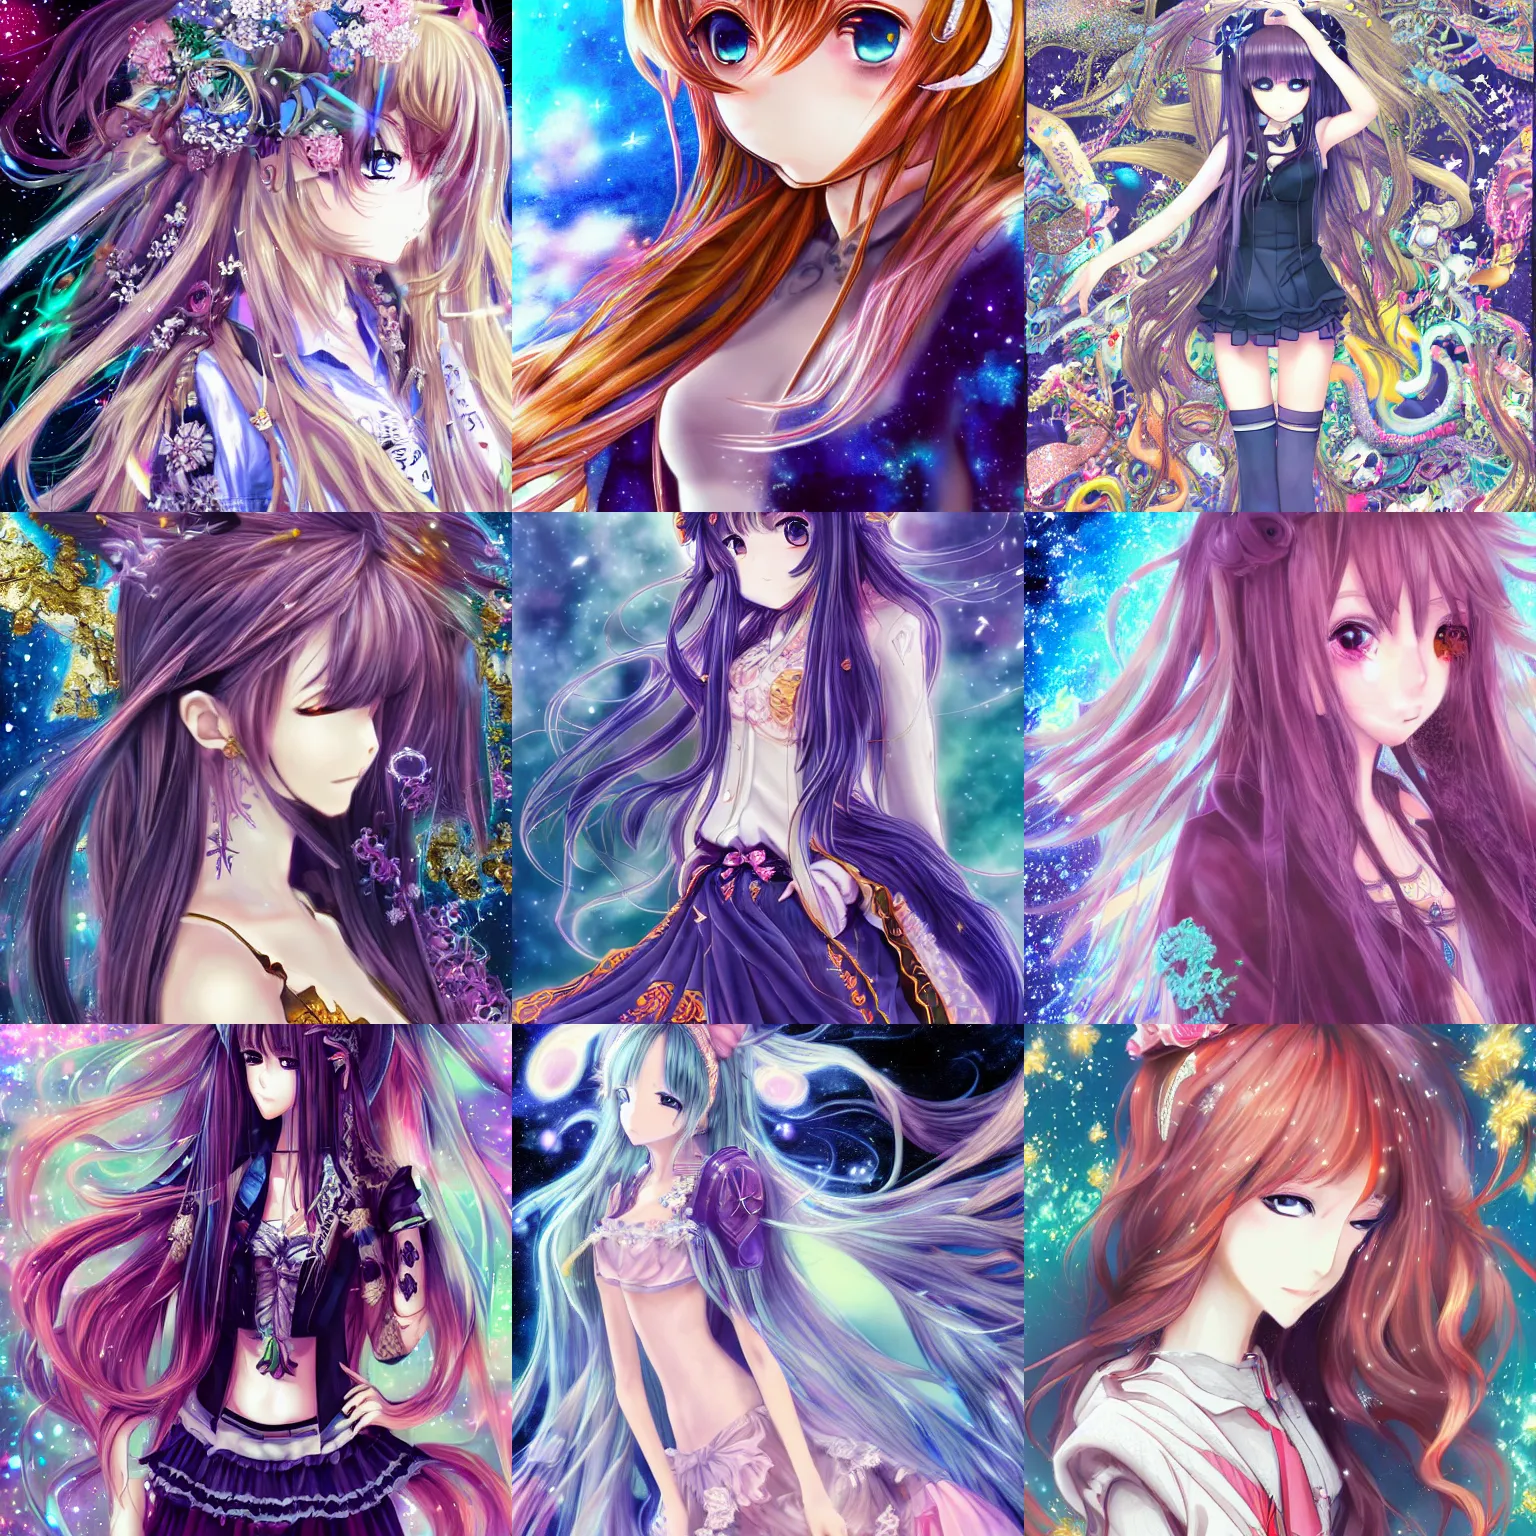 Prompt: anime girl with clothes with cosmic, magic long hair, super - resolution, hsl, 2 - bit, vr, uniform, nano, senary, rtx, insanely detailed and intricate, hypermaximalist, elegant, ornate, hyper realistic, super detailed, full body, full body shot,